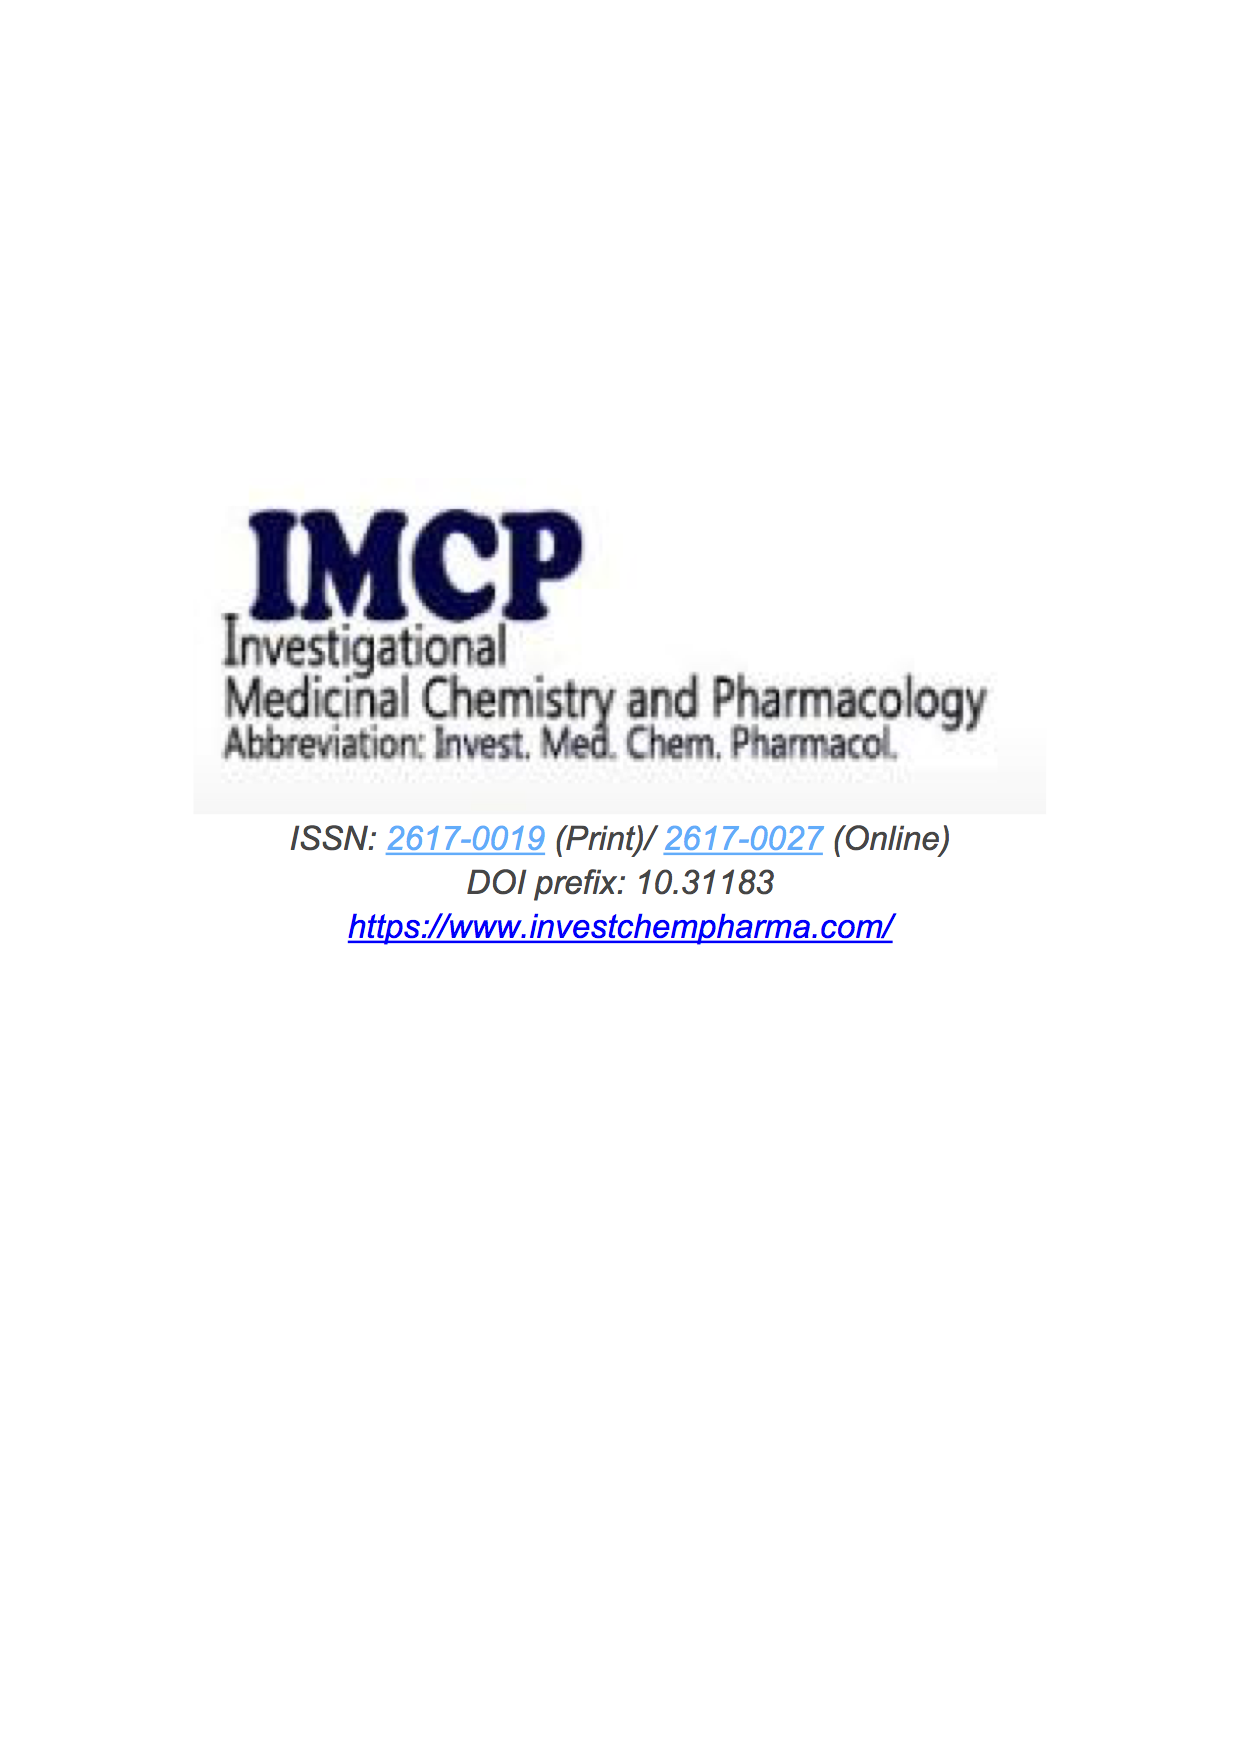 Investigational Medicinal Chemistry and Pharmacology